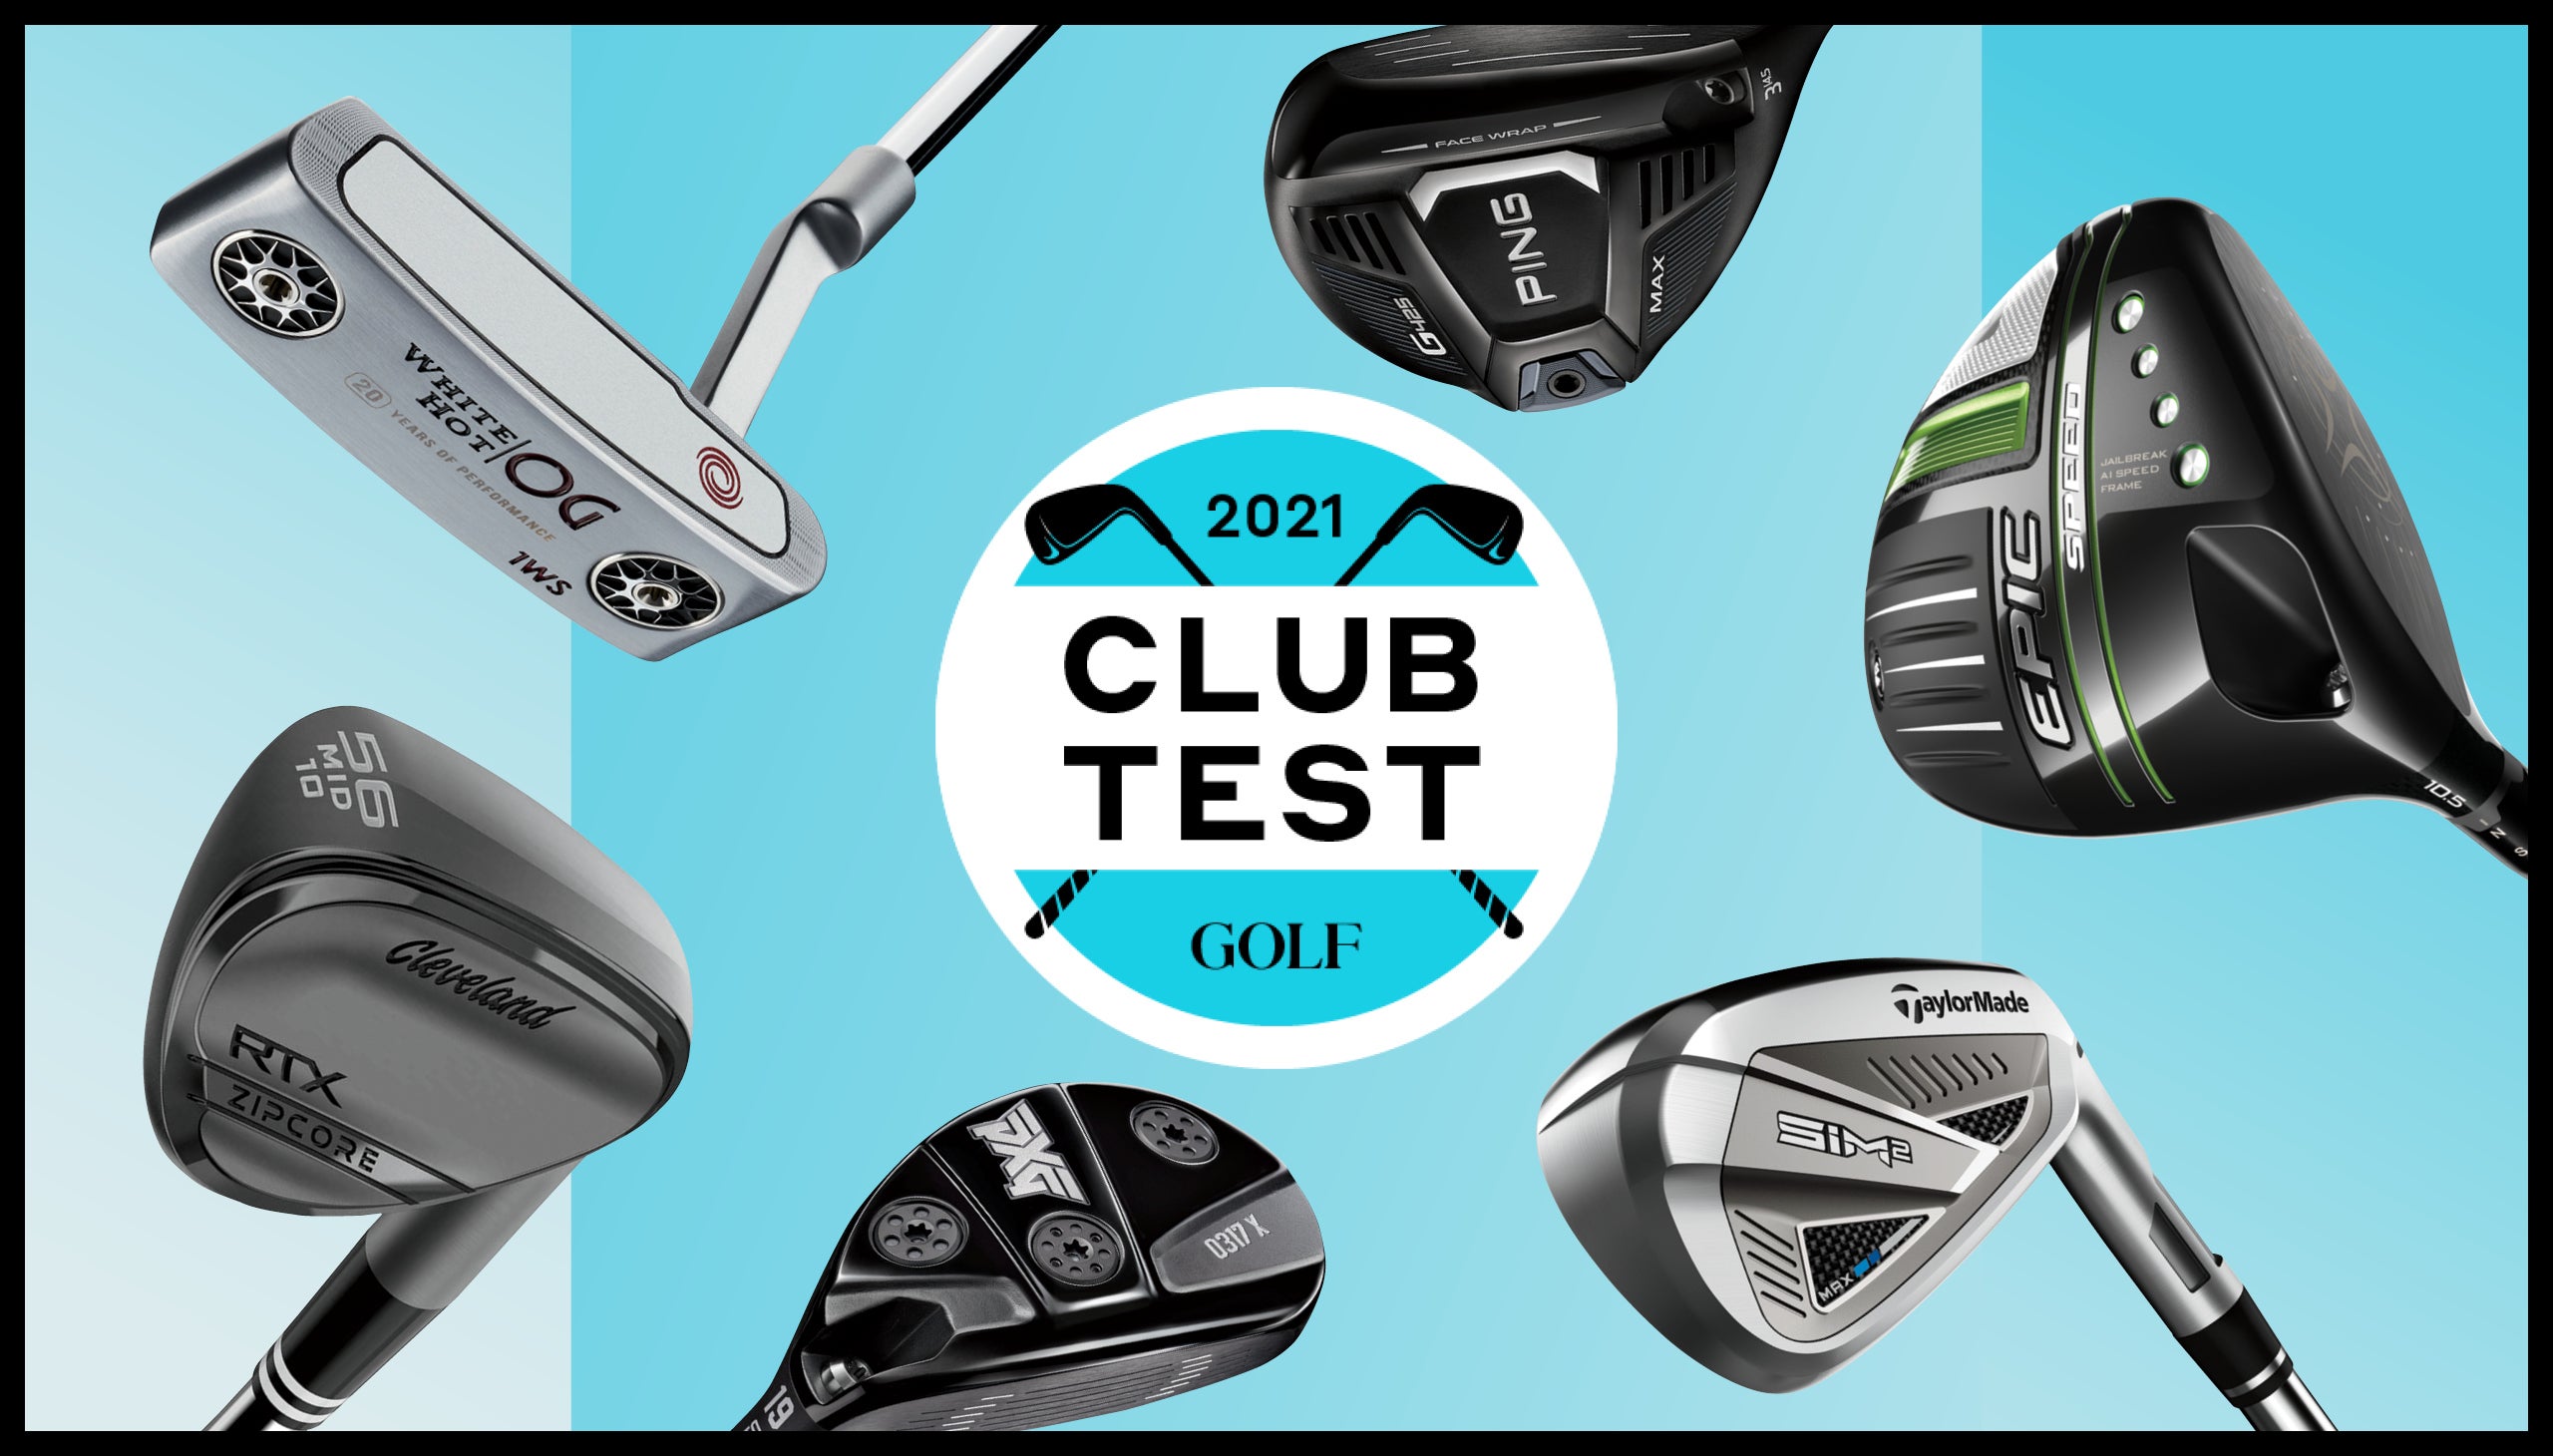 ClubTest 2021 is here! reviews of the golf equipment